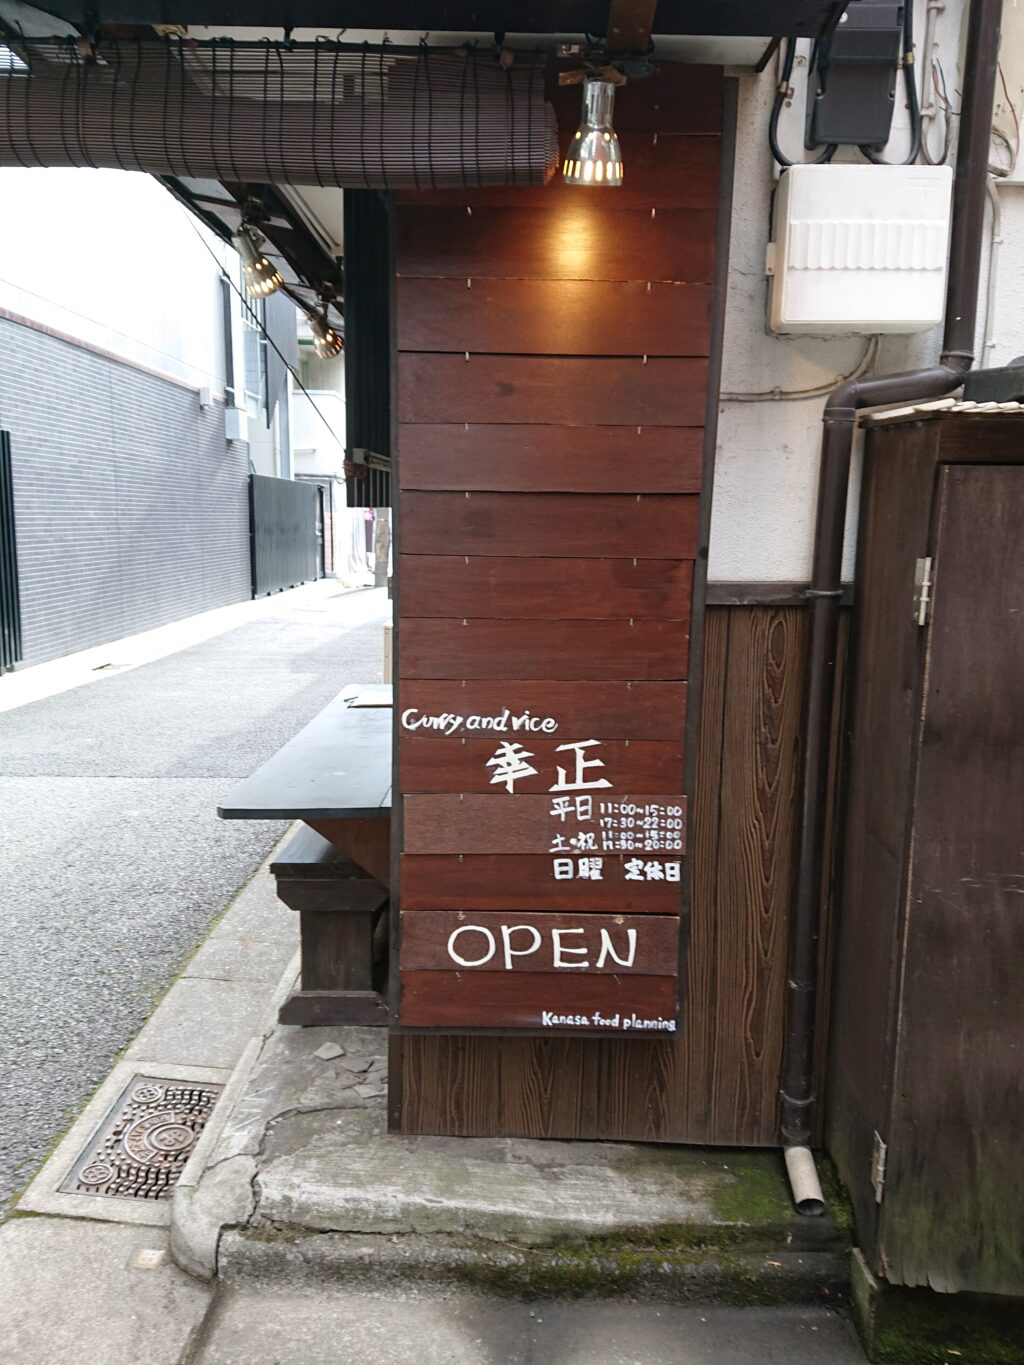 curry and rice 幸正 お店の情報